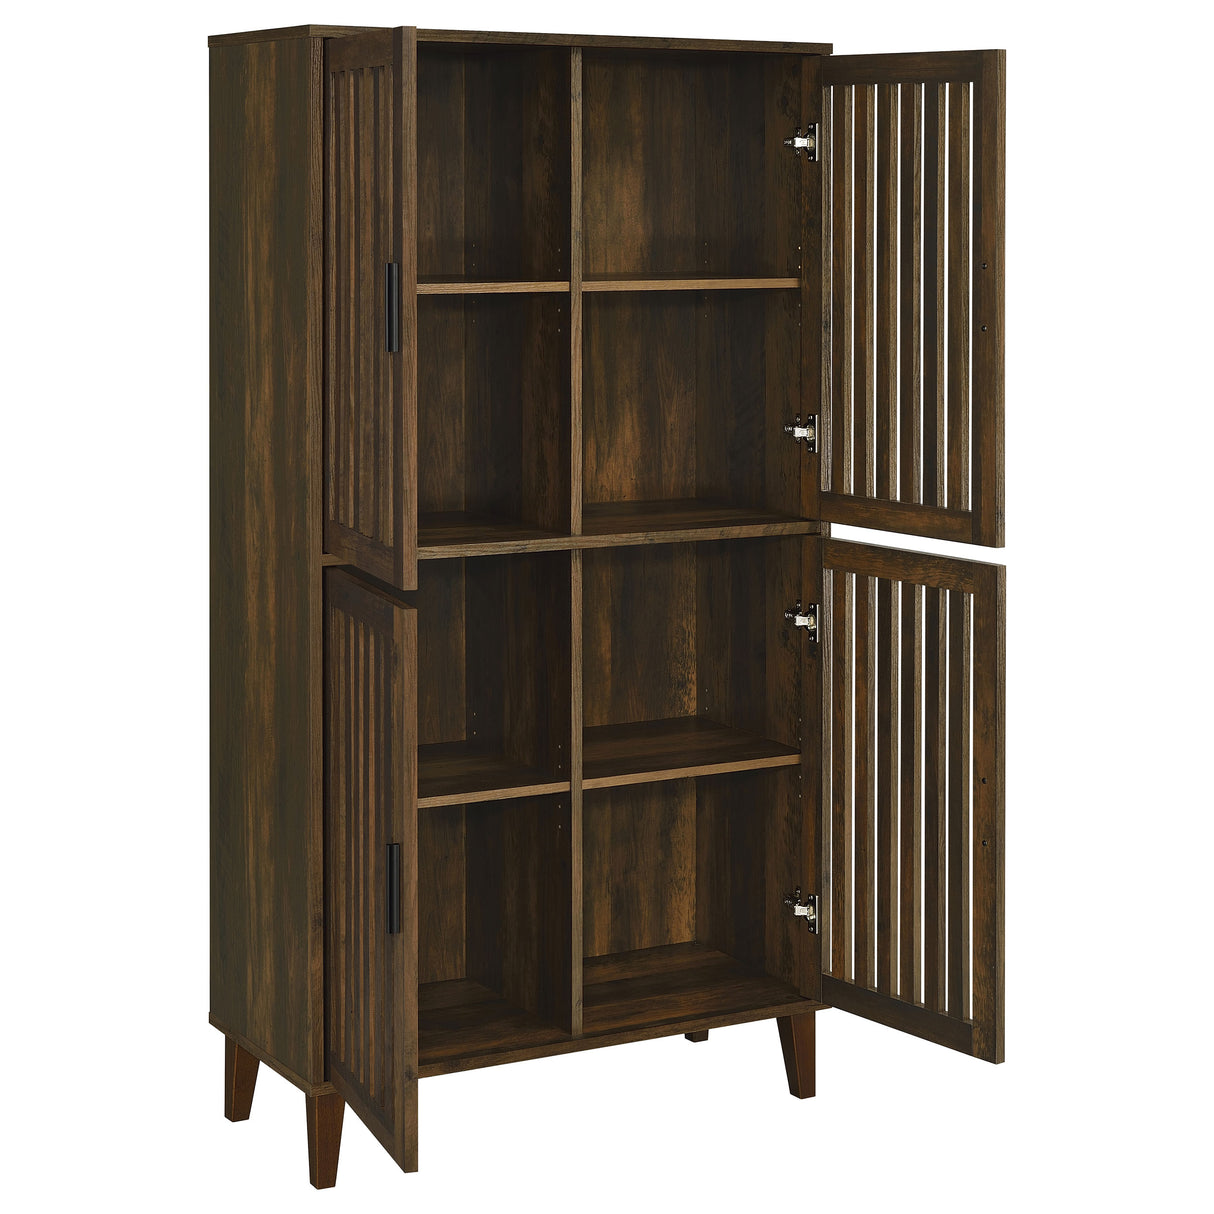 Tall Accent Cabinet - Elouise 4-door Engineered Wood Tall Accent Cabinet Dark Pine